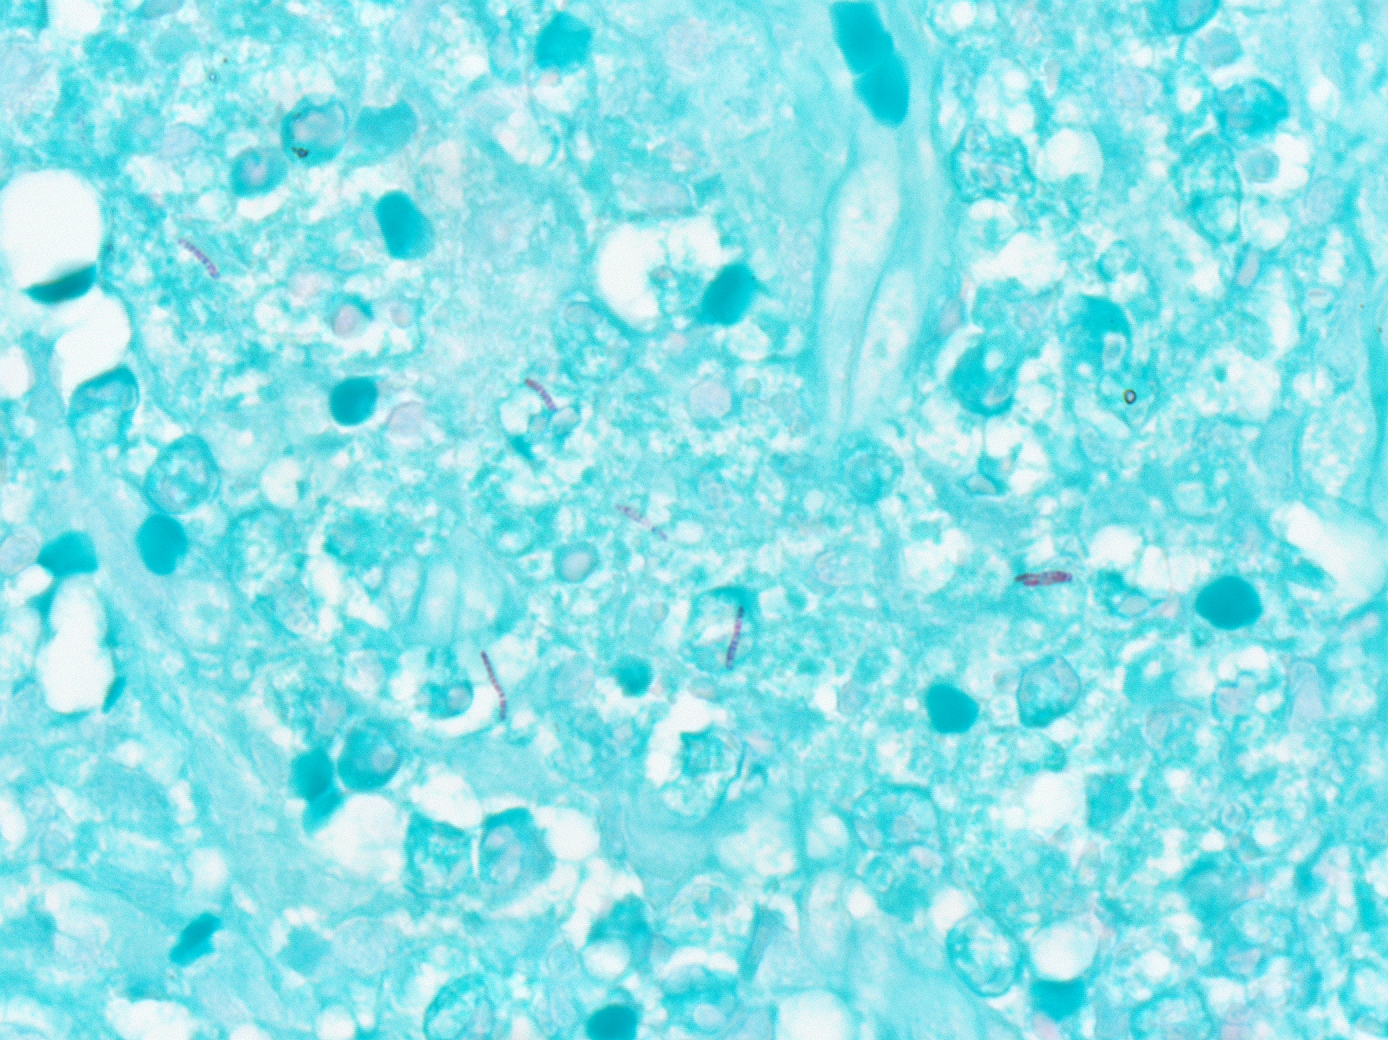 Acid-fast stain showing mycobacteria in a patient with Mycobacterium marinum skin infection